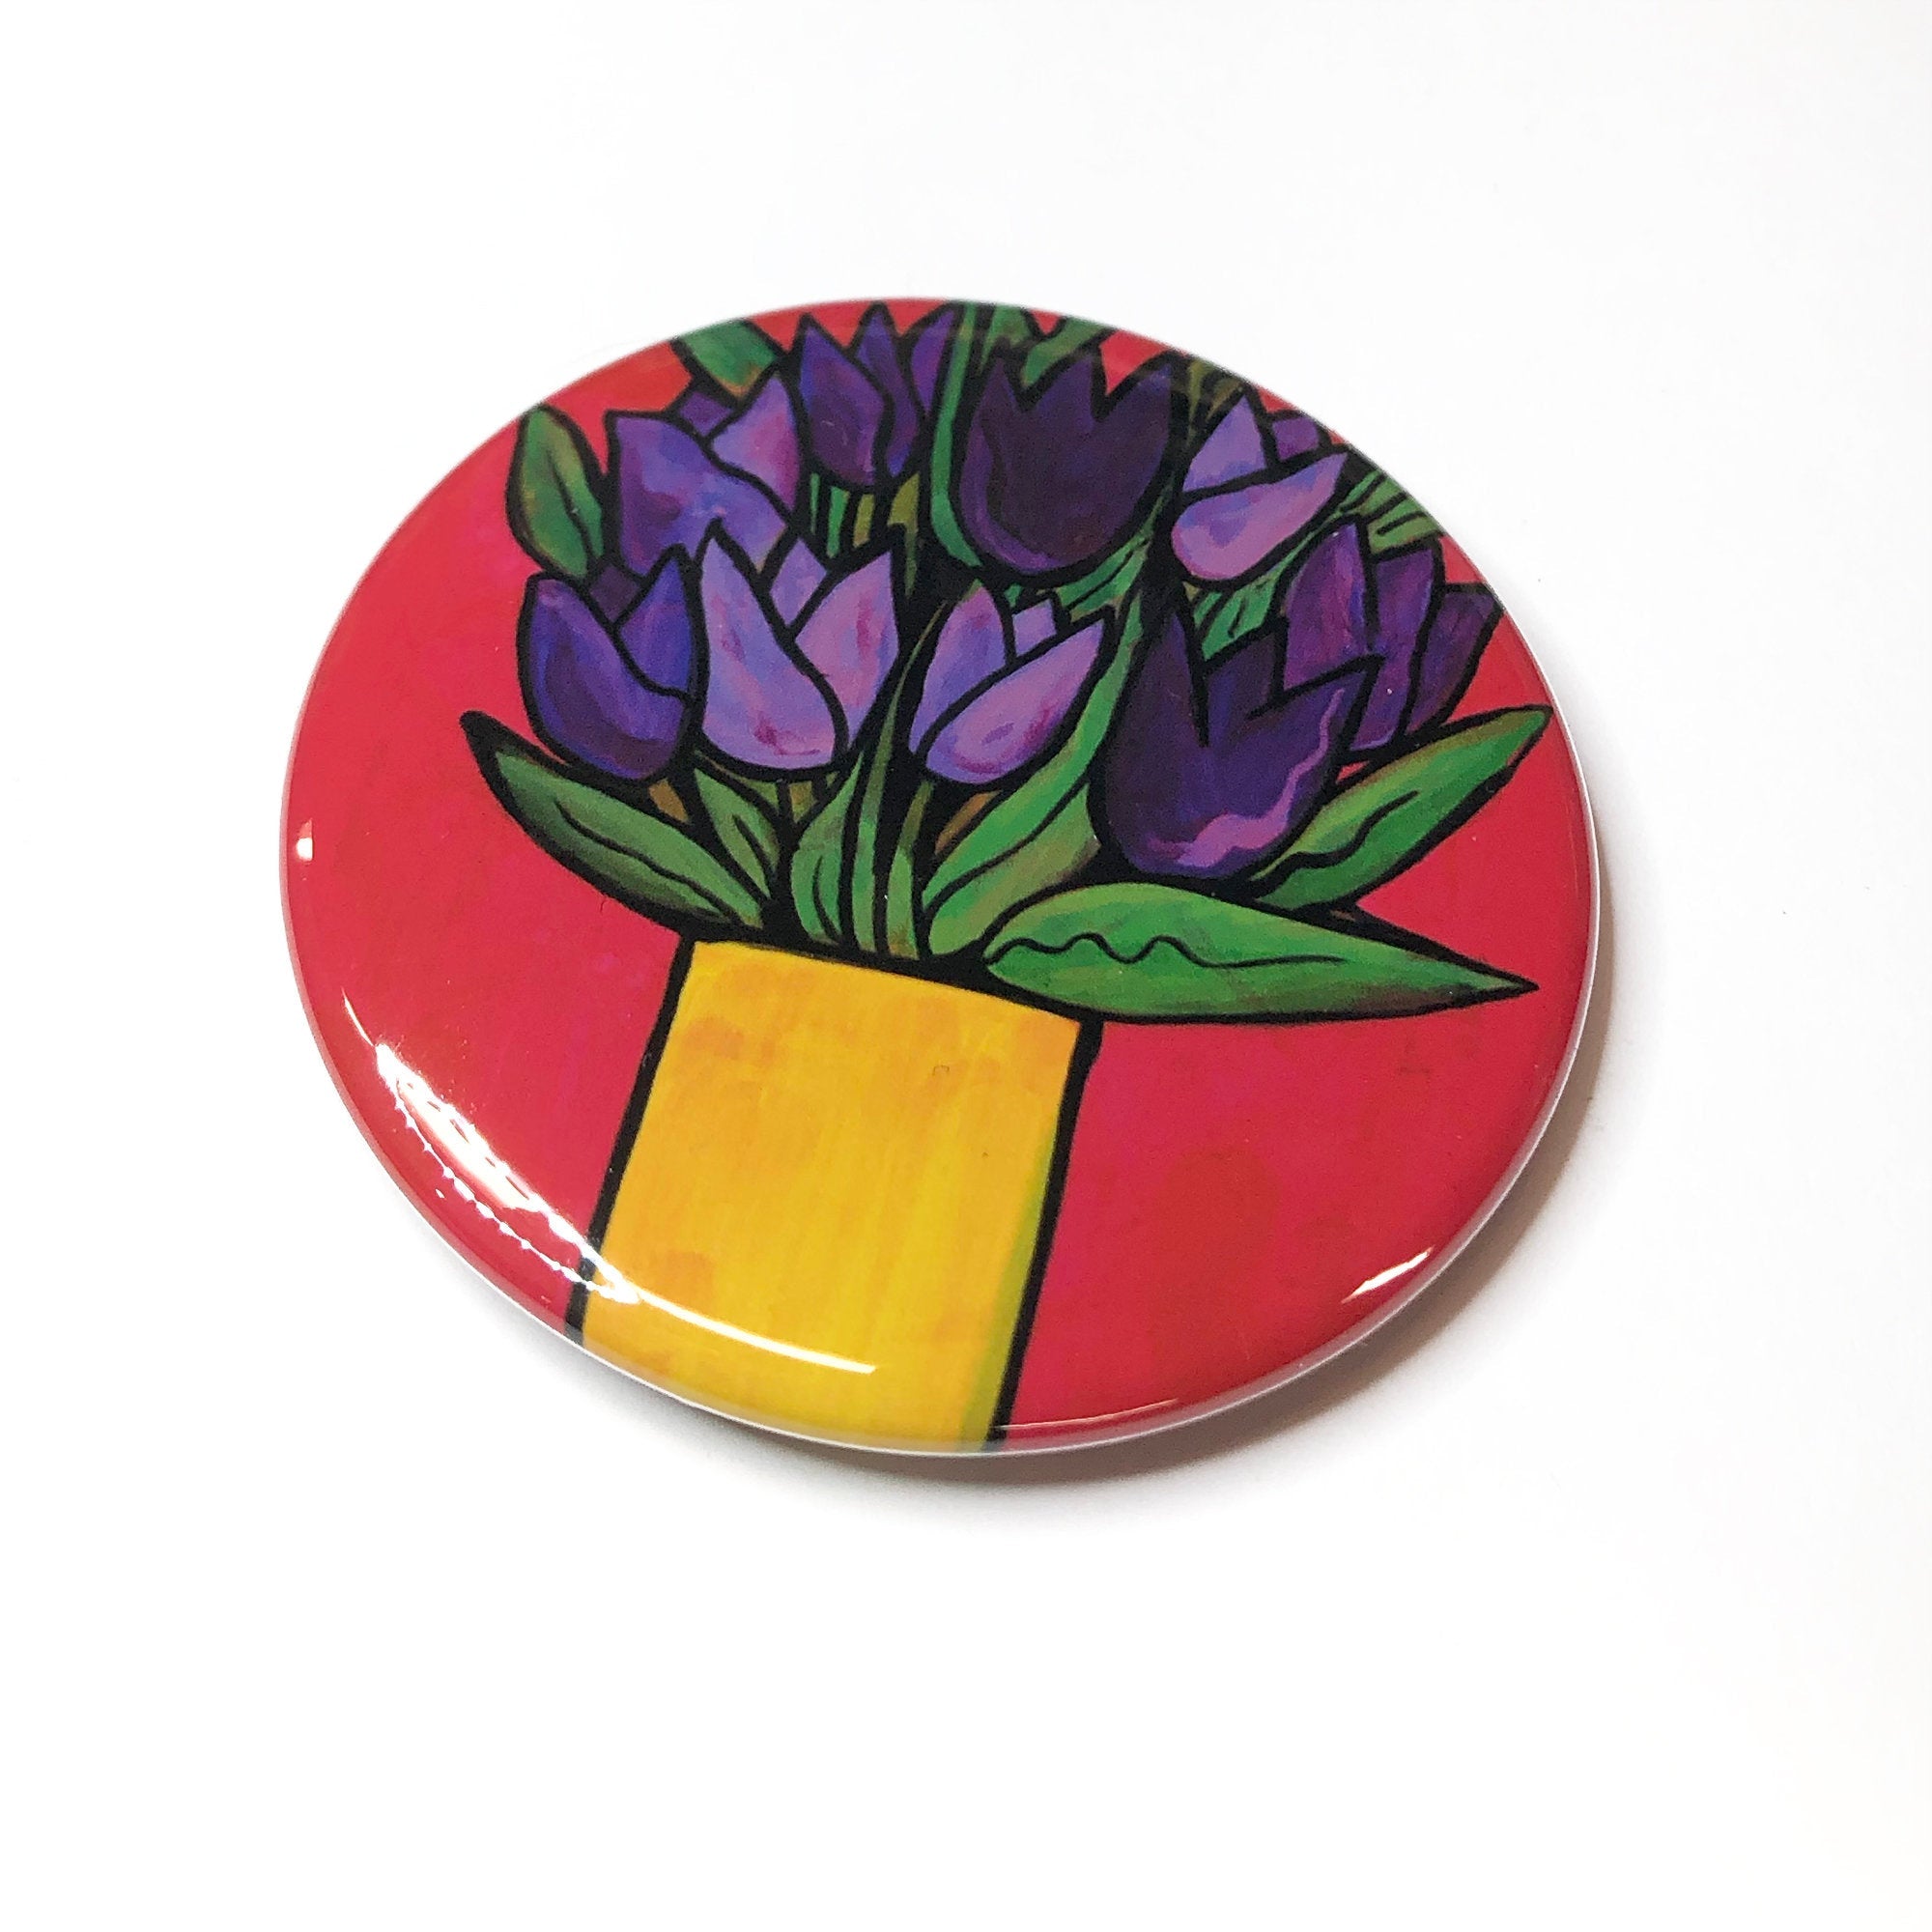 Purple Tulip Magnet, Pin Back Button, or Pocket Mirror - Purple Flowers in Vase - 1 inch, 1.25 inch, 2.25 inch